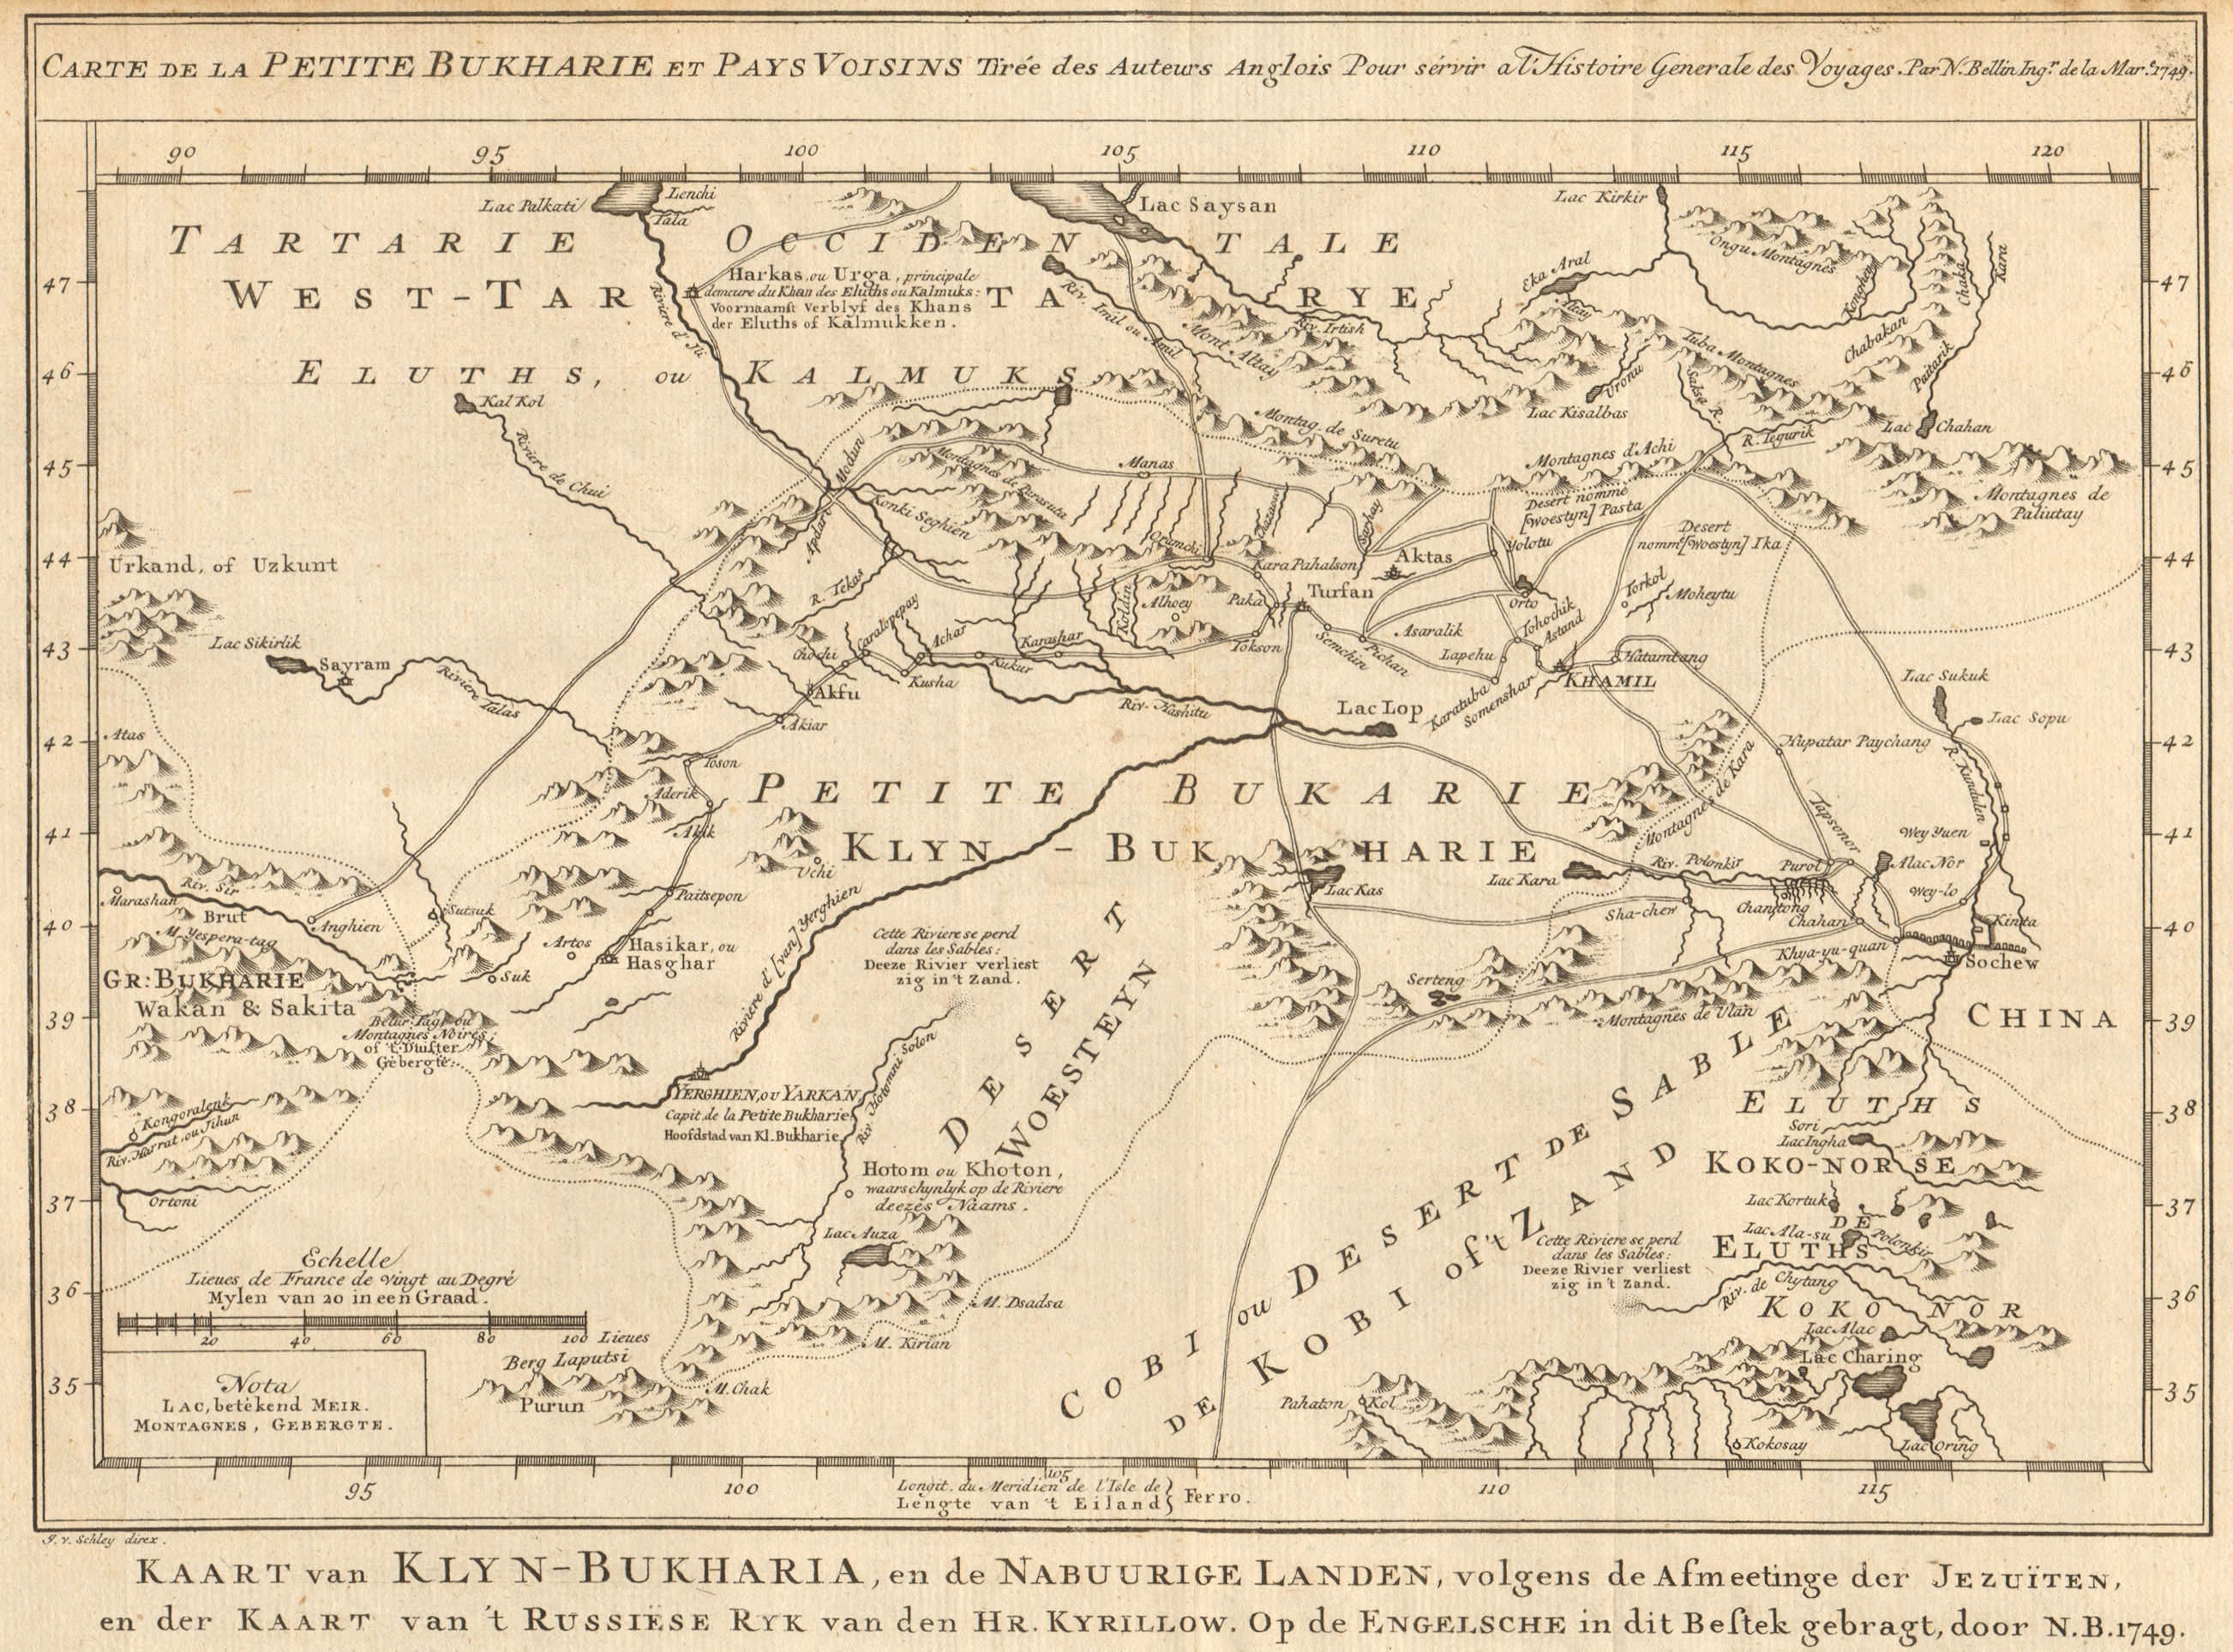 'Petite Bukkarie'. Central Asia. Little Bukhara. W China. BELLIN/SCHLEY 1749 map